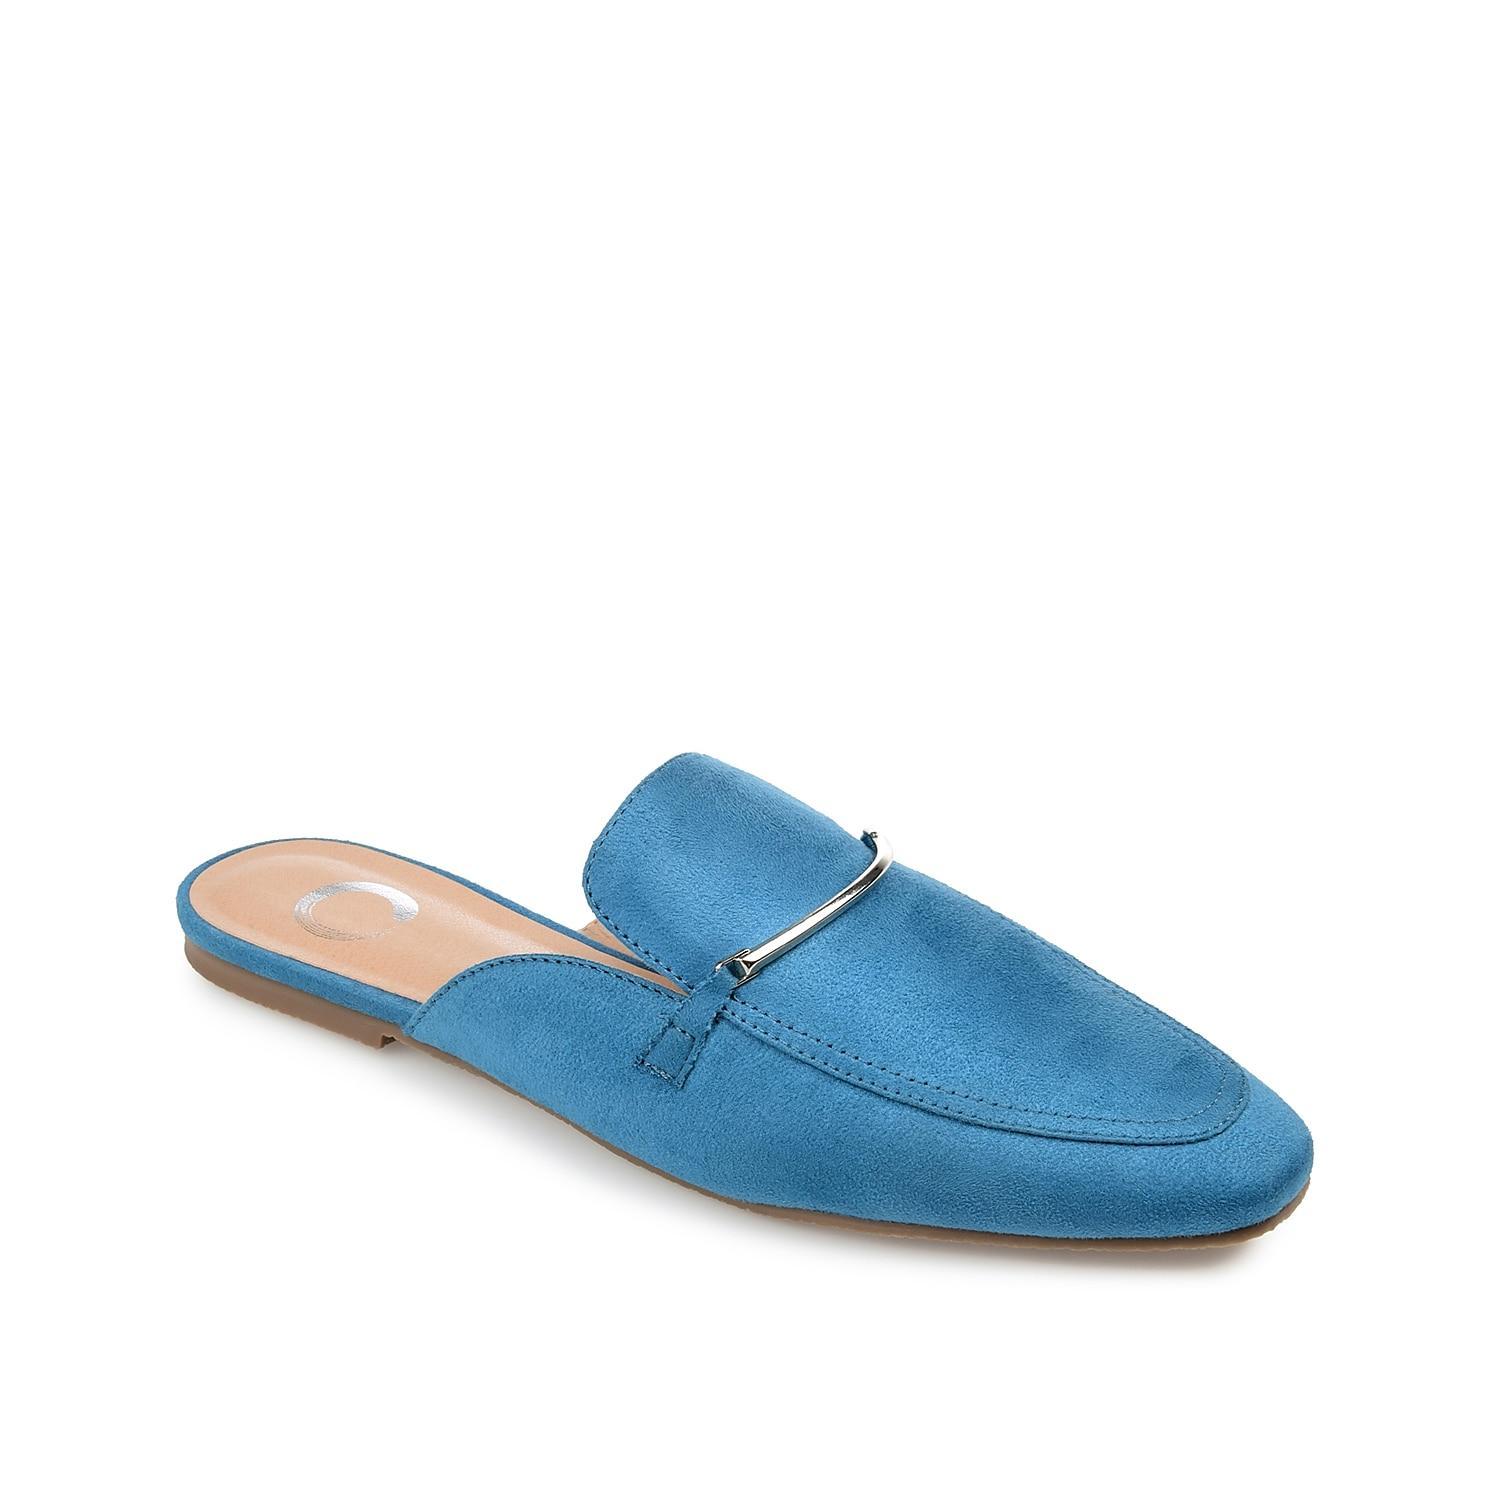 Journee Collection Ameena Womens Mules Brown Product Image